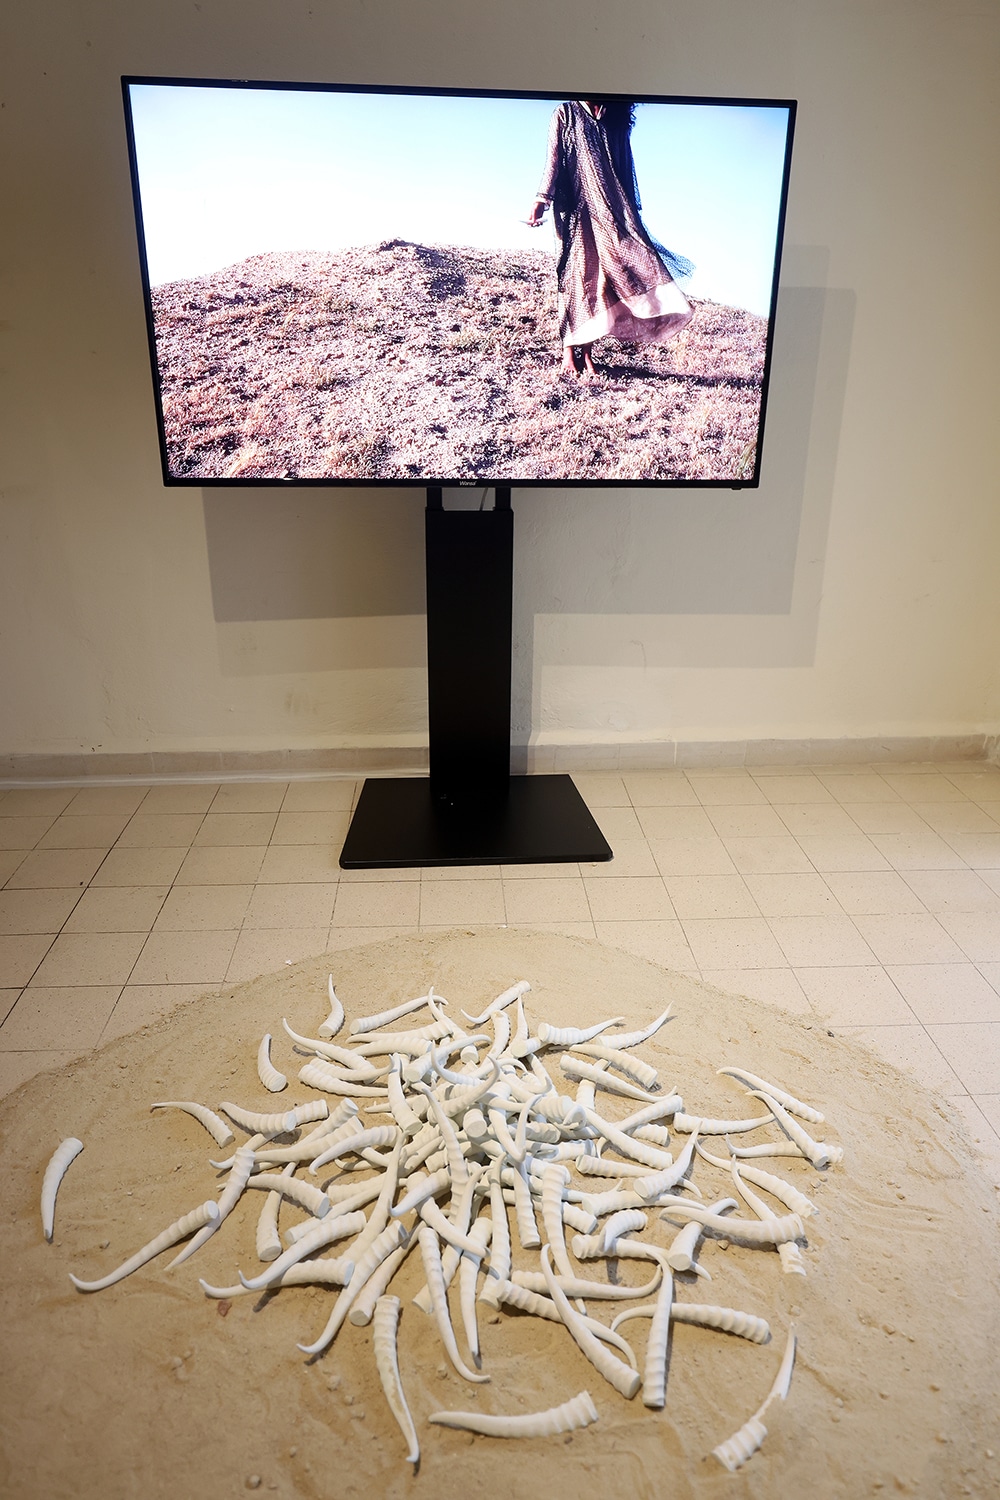 This photo shows “Anthropocene, 2023”, one of the artworks at the exhibit.